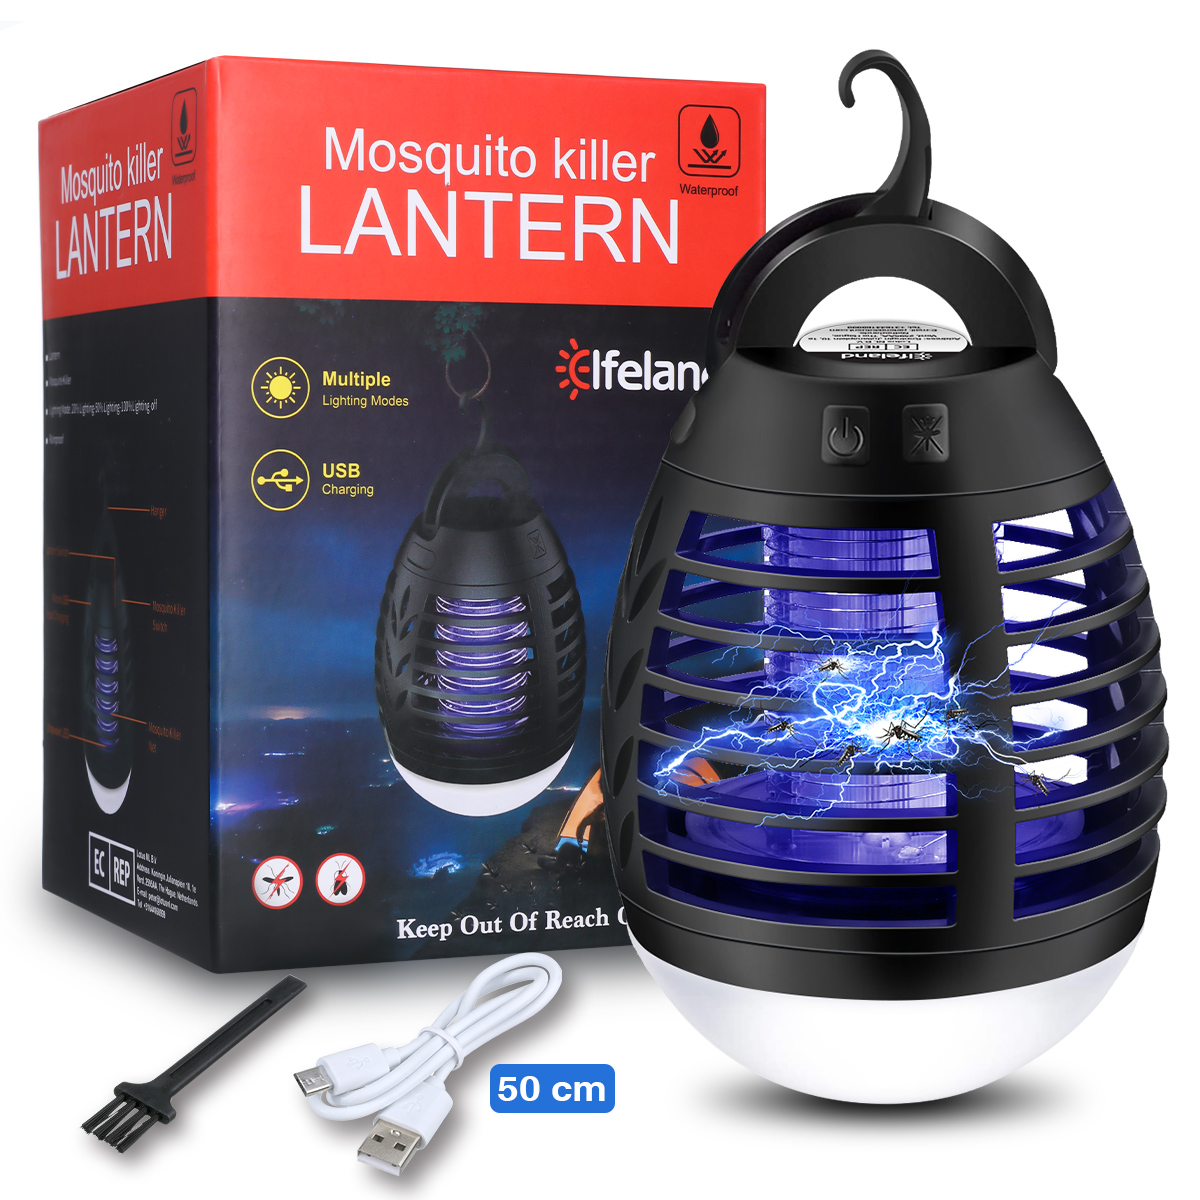 Elfeland-5W-Electric-Mosquito-Killer-Lamp-USB-Powered-Trap-Gnat-with-Hanger-for-Indoor-Outdoor-1710190-10